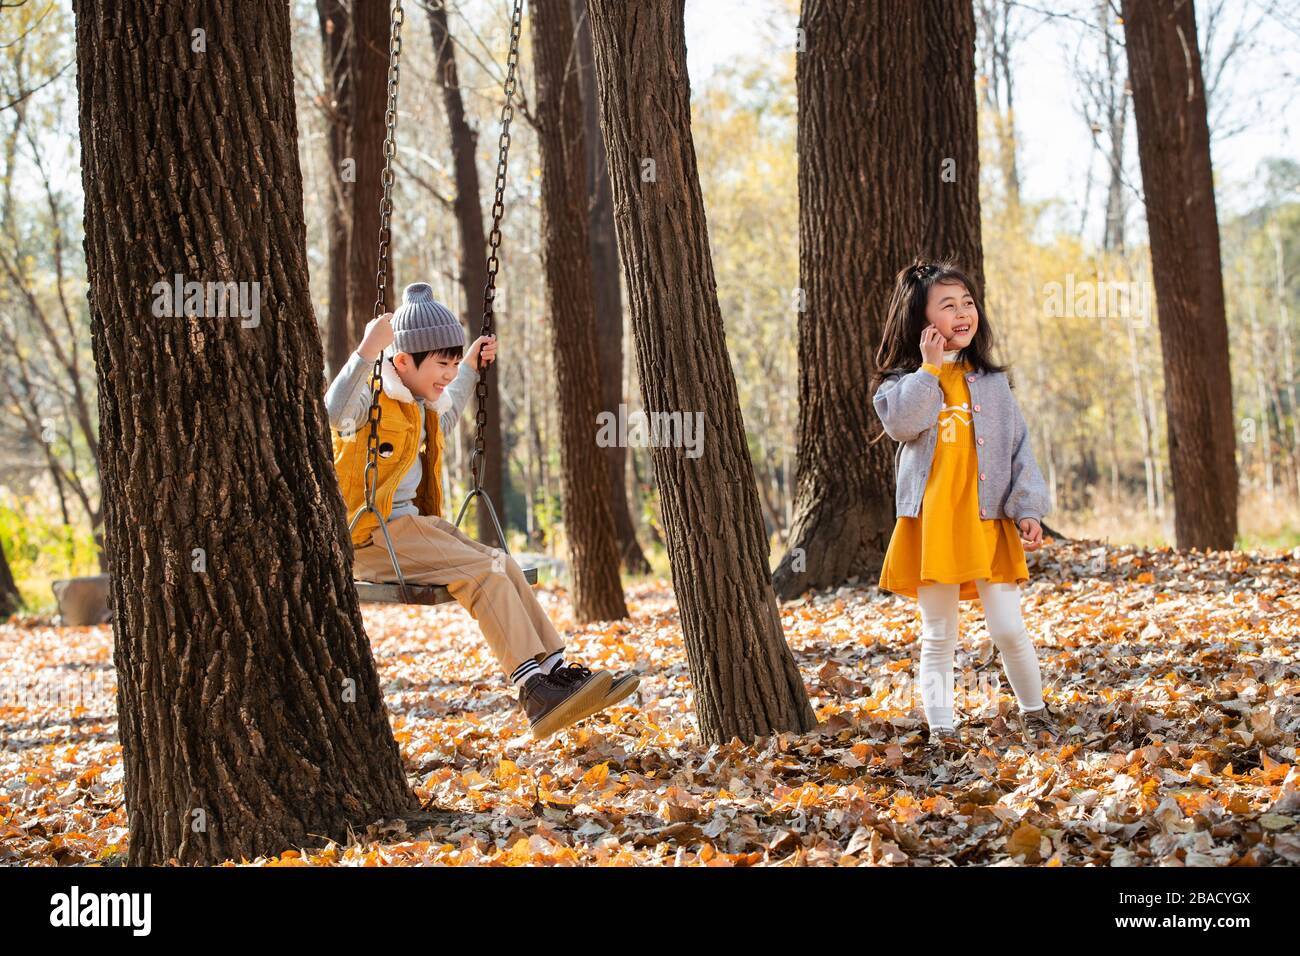 Outdoor little boy on the swings, the little girl go sight-seeing Stock Photo